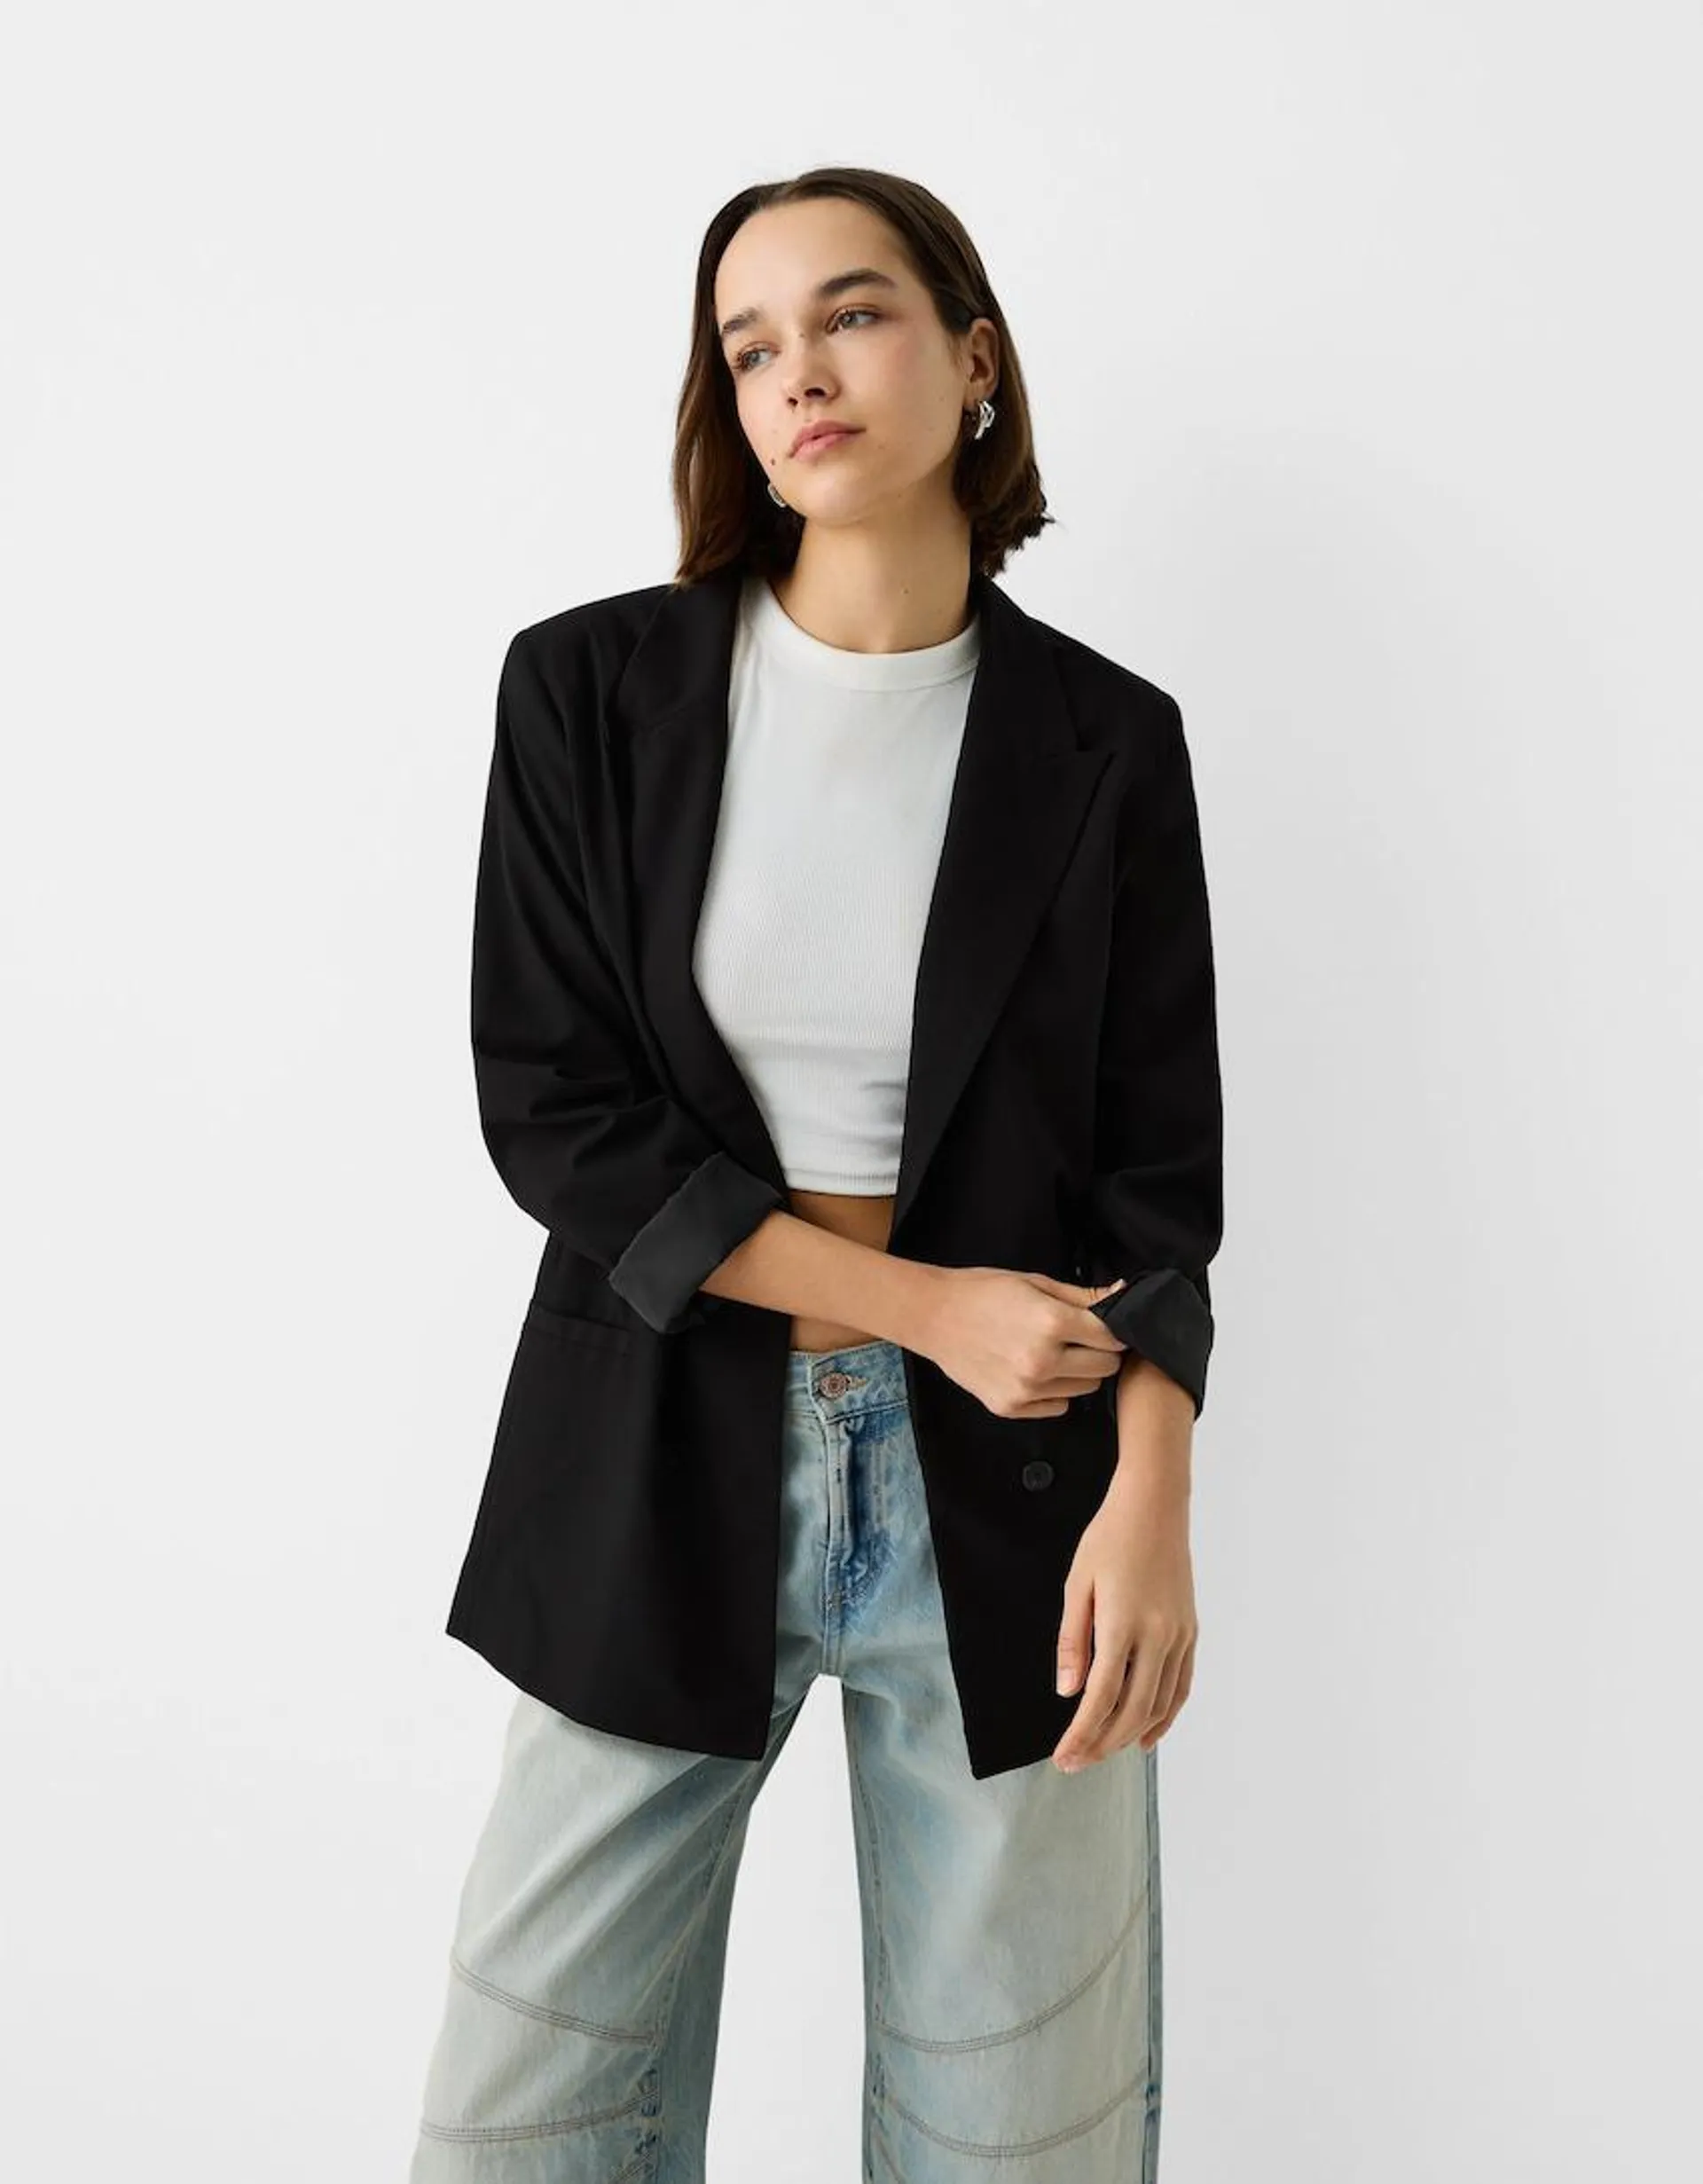 Slim-fit flowing double-breasted blazer